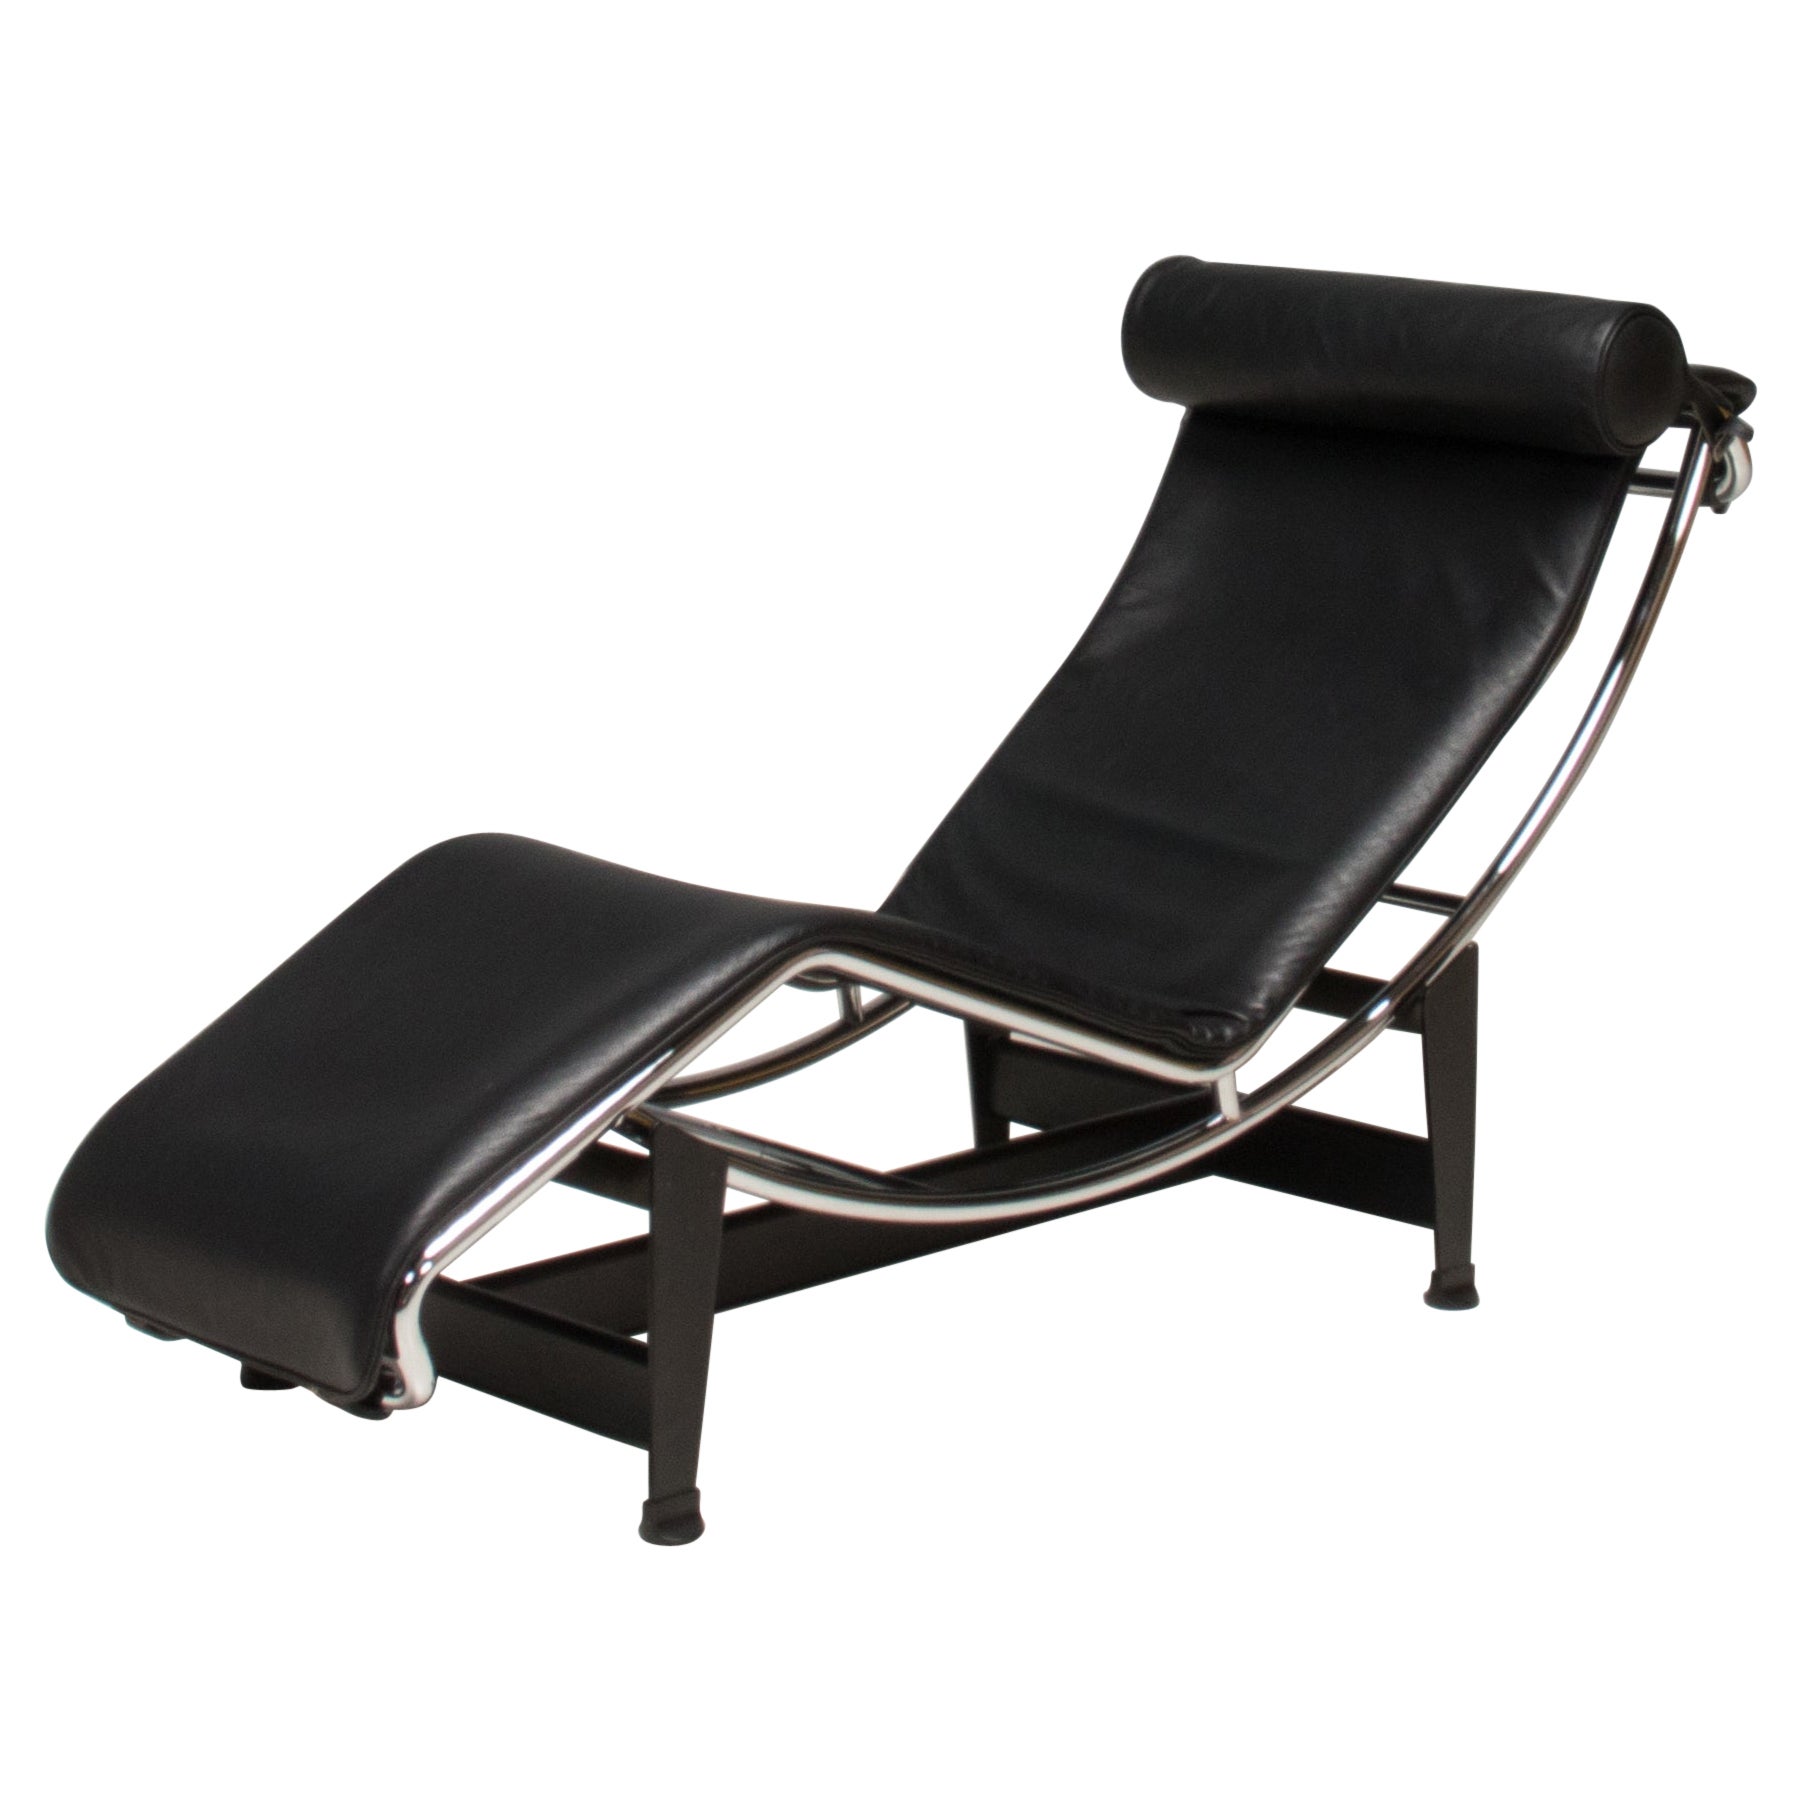 Cassina Le Corbusier, Pierre Jeanneret & Charlotte Perriand LC4 Chaise Lounge